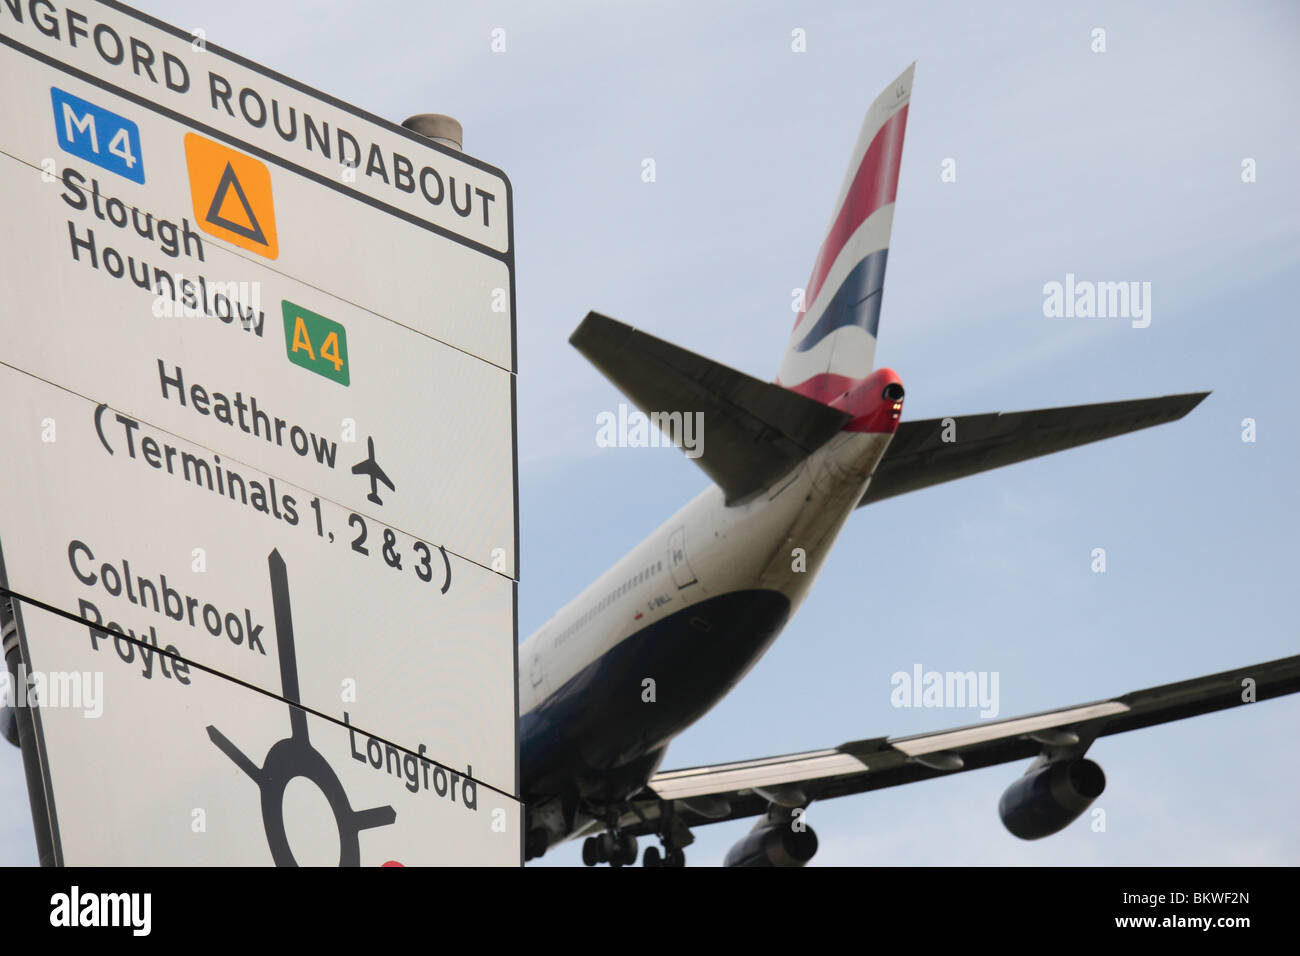 A British Airways 747 passing a road sign while landing at Heathrow Airport, London, UK. Stock Photo